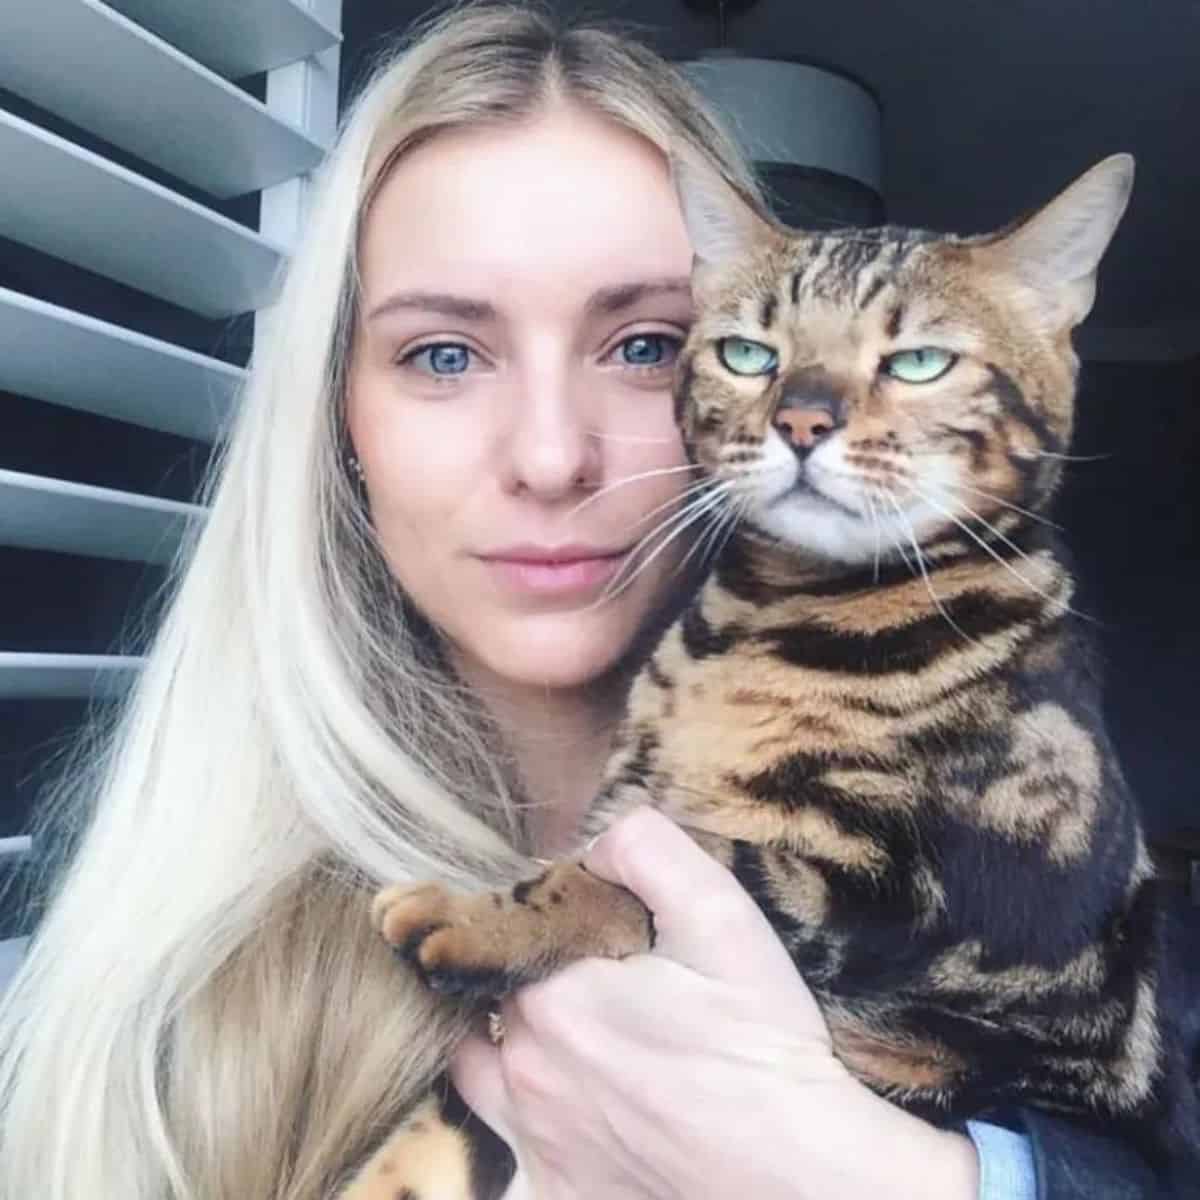 a girl takes a picture with a tiger cat